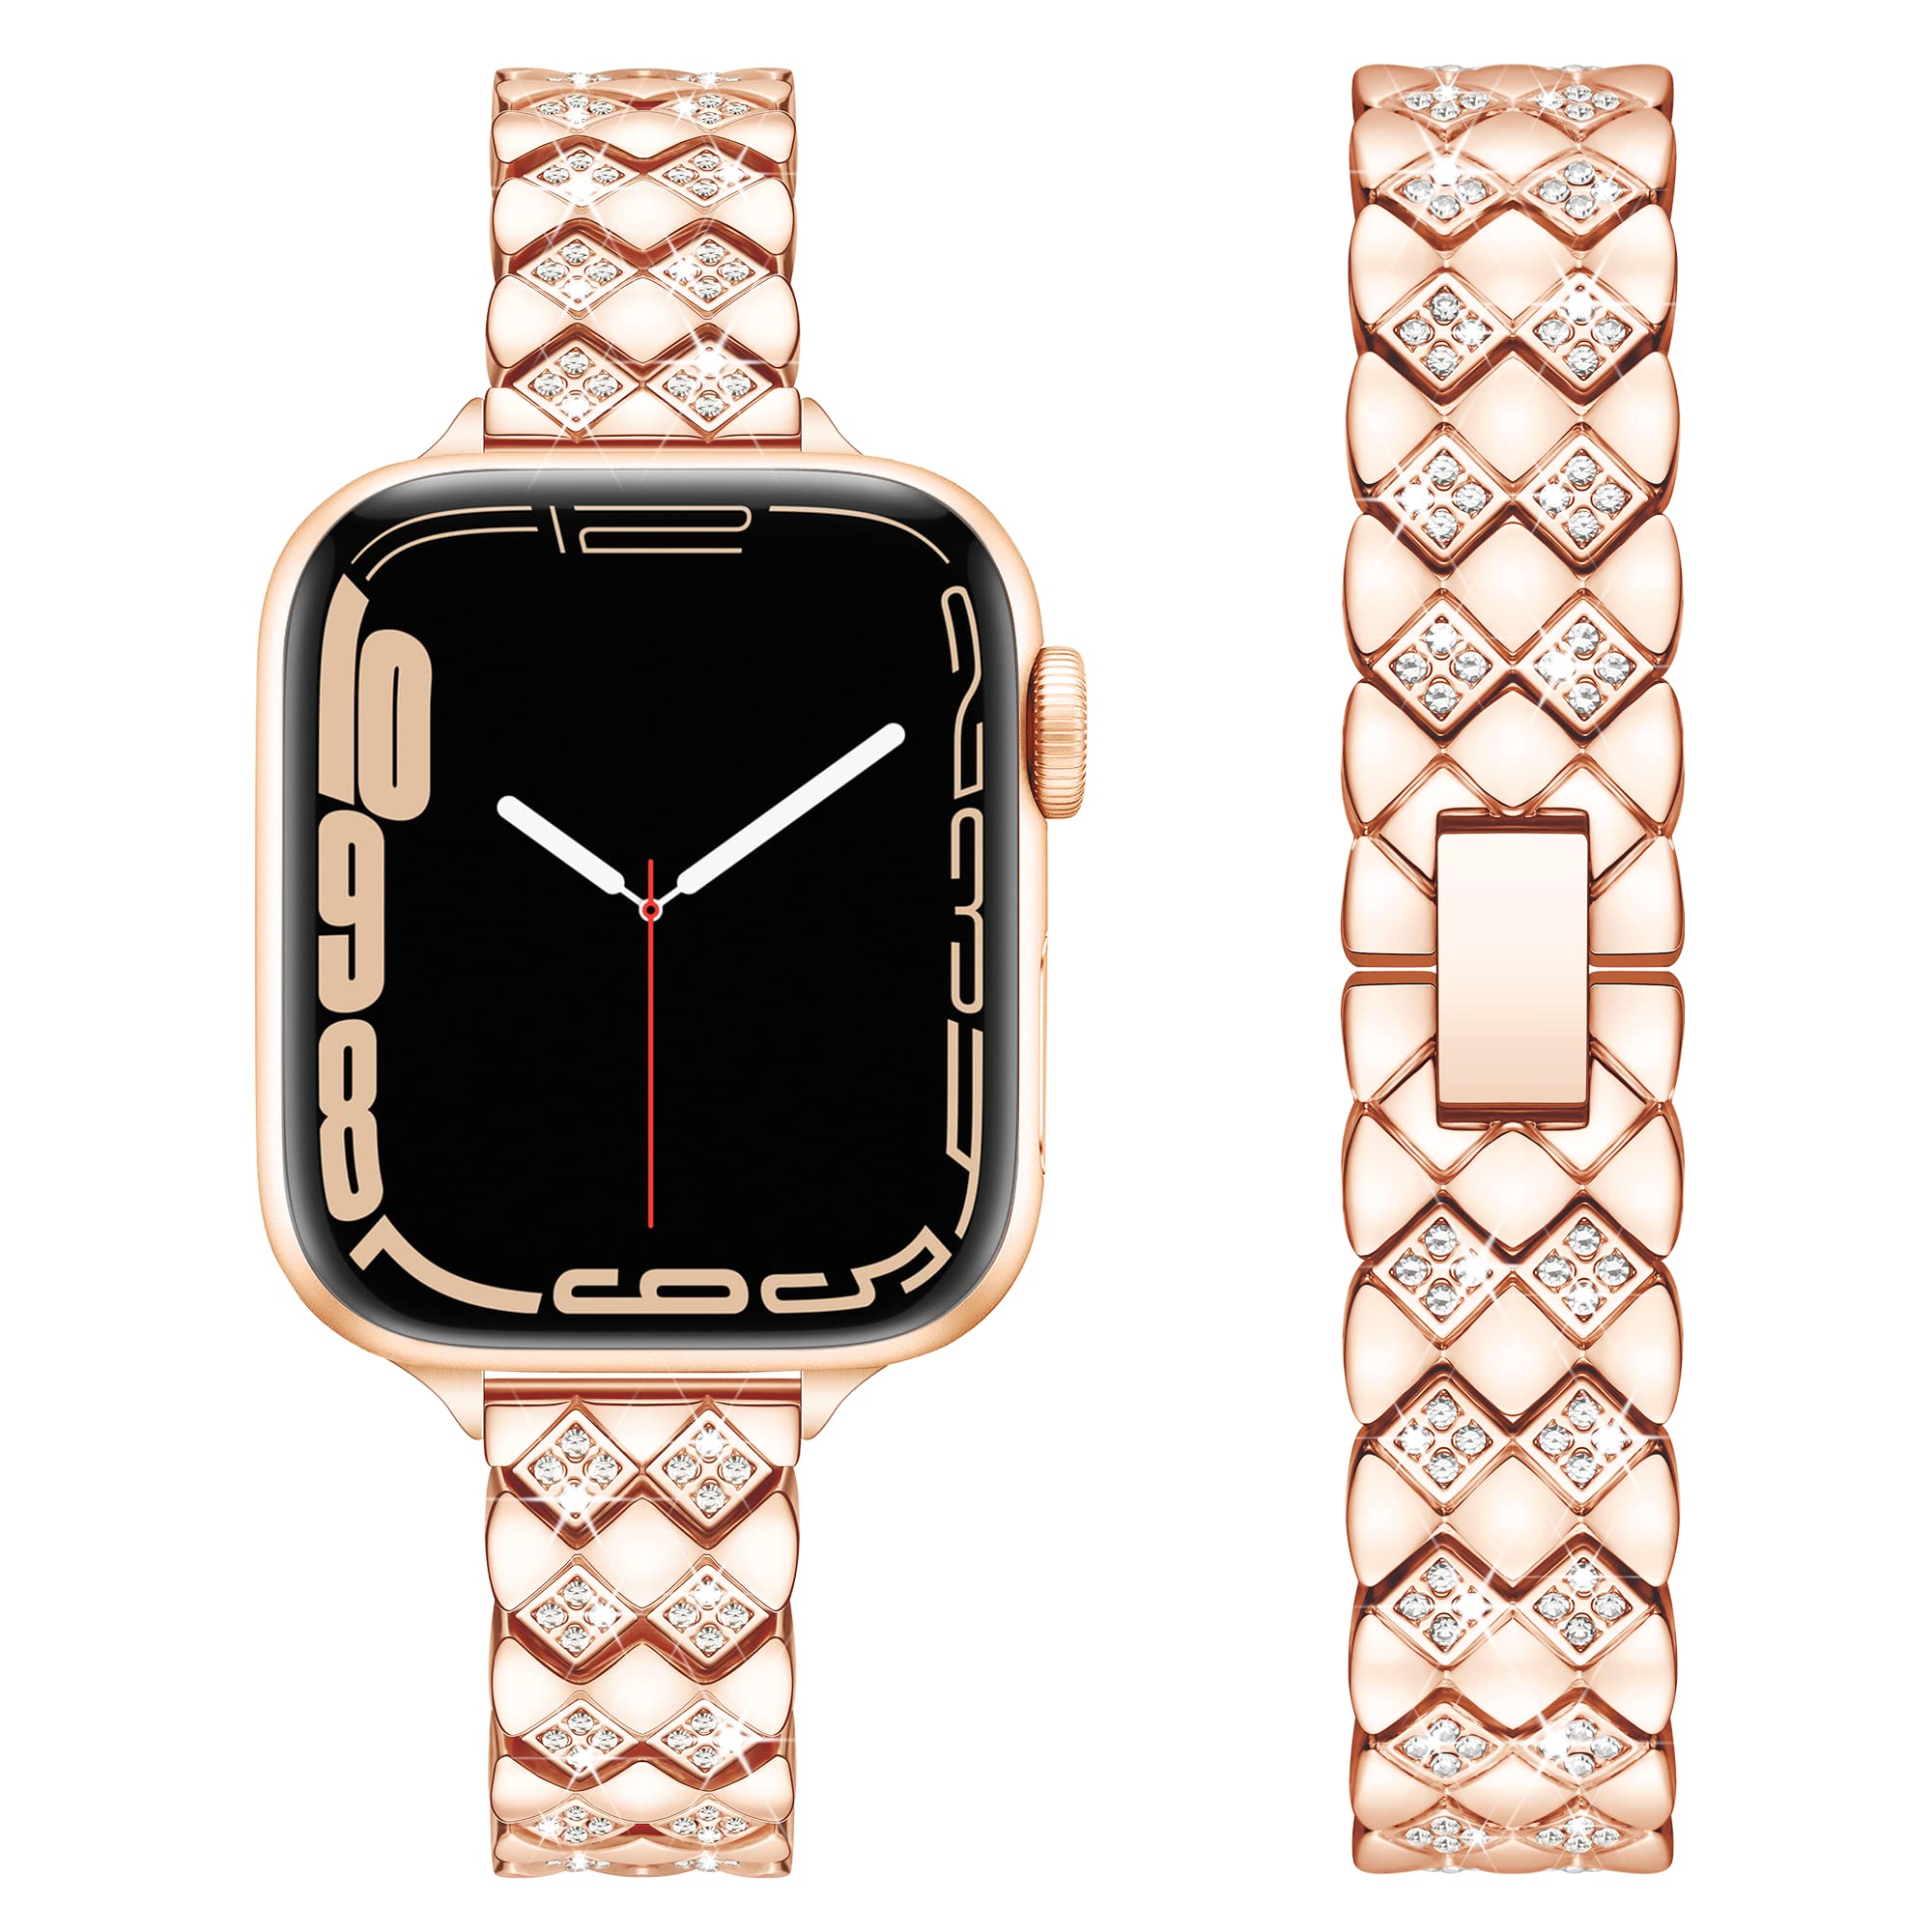 Luxury Grid Style Stainless Steel Bracelet with Rhinestones iWatch Bands for All Series